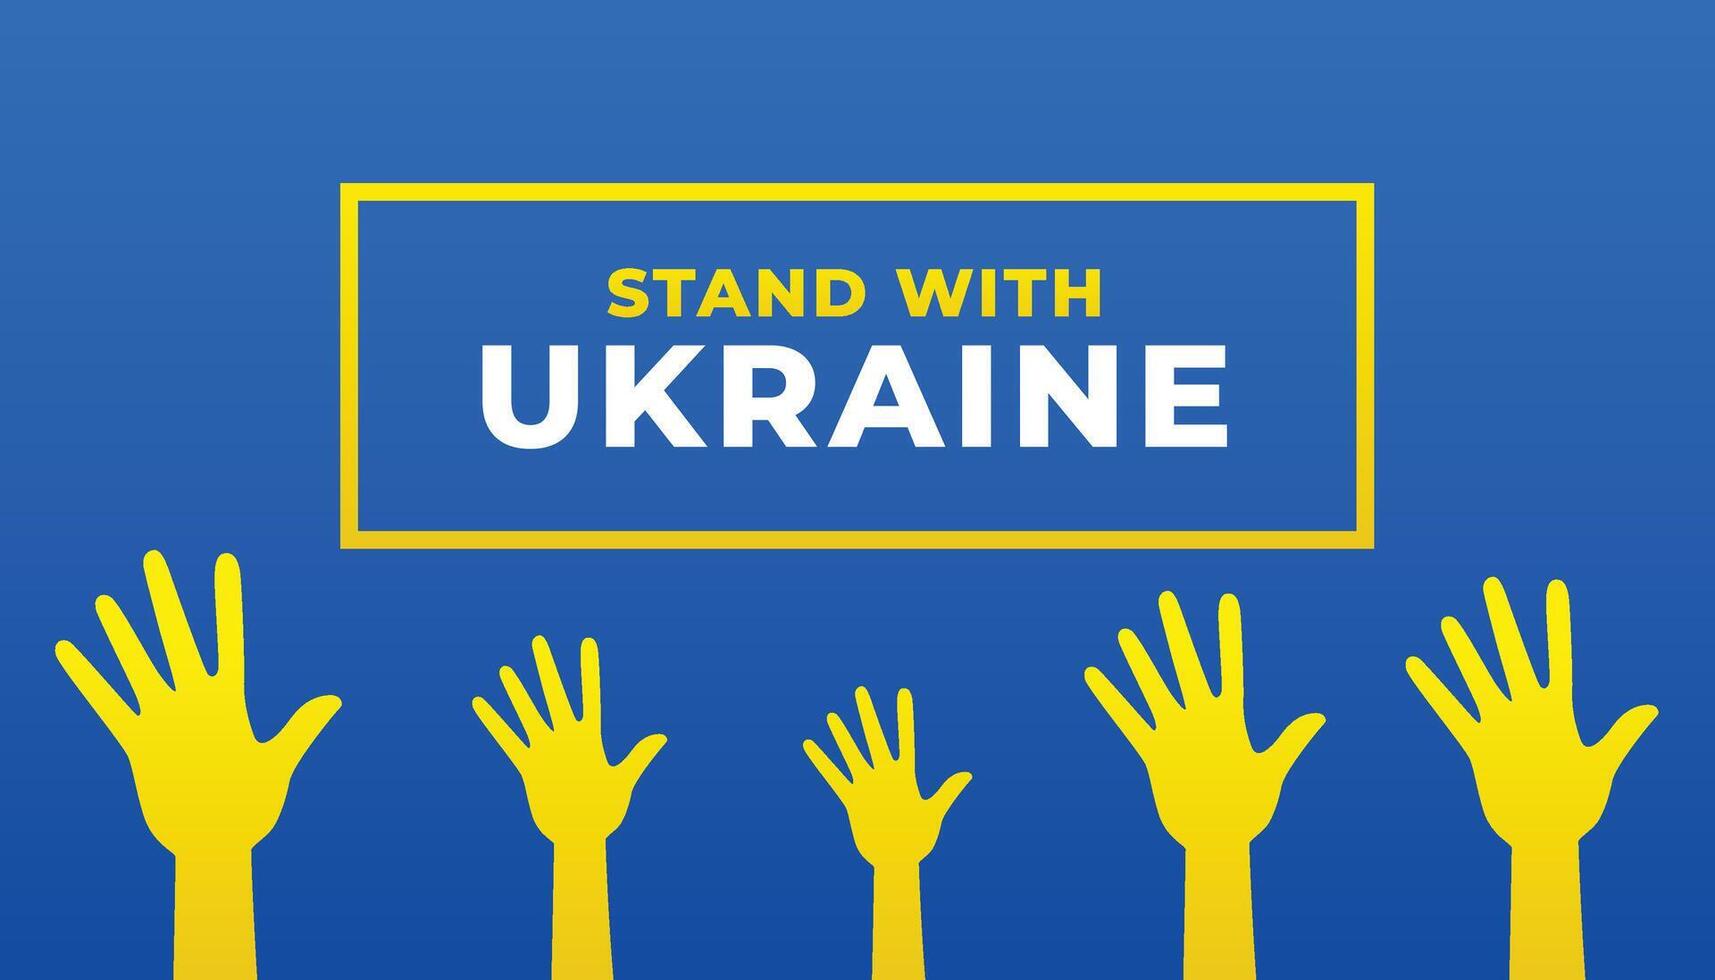 flat style stand with ukraine concept poster vector